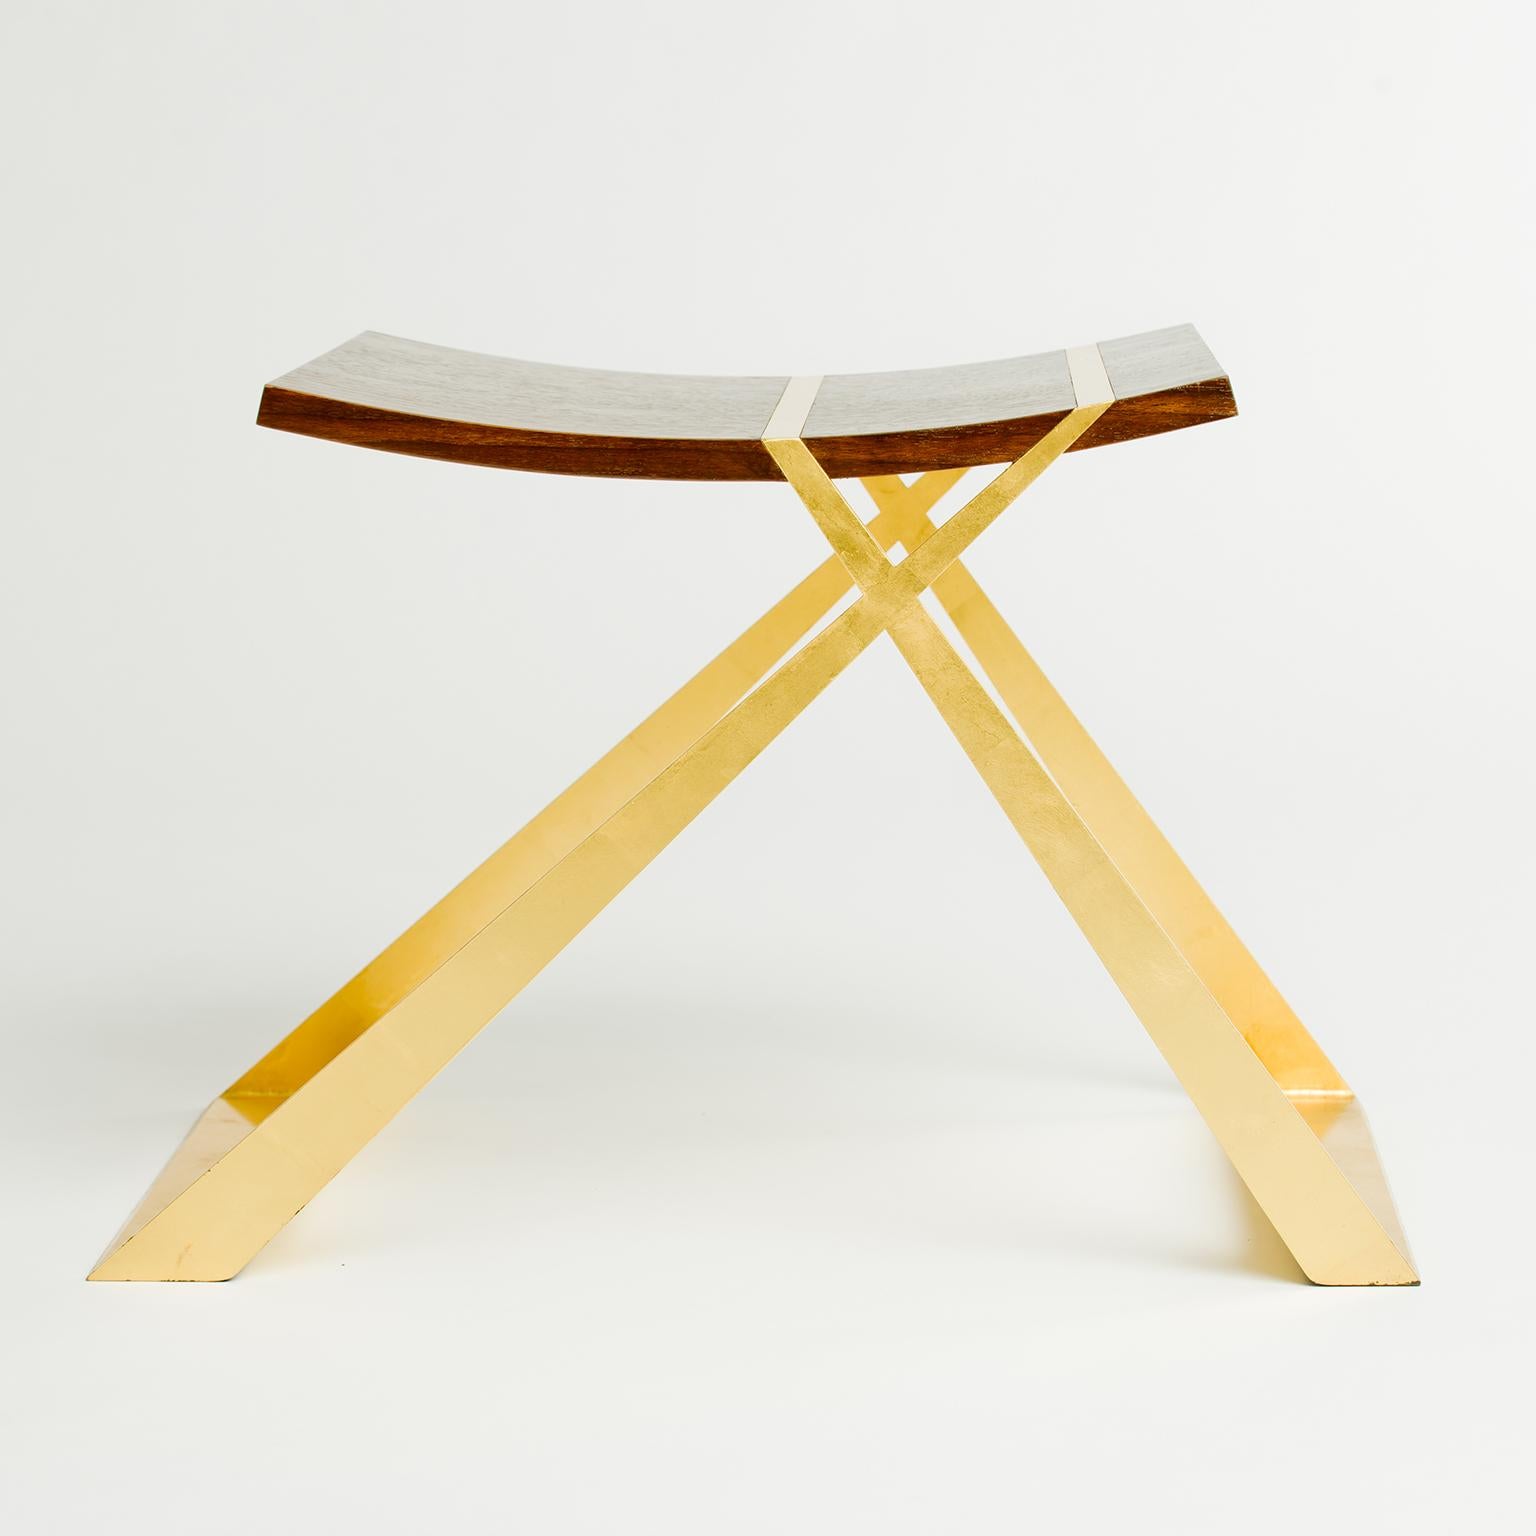 This delightful little stool was designed to defy gravity. It seems to be extremely delicately balanced when in reality it is extremely sturdy. It is the perfect piece if you need an eye-catching stool that doesn’t seem overly bulky.

Custom